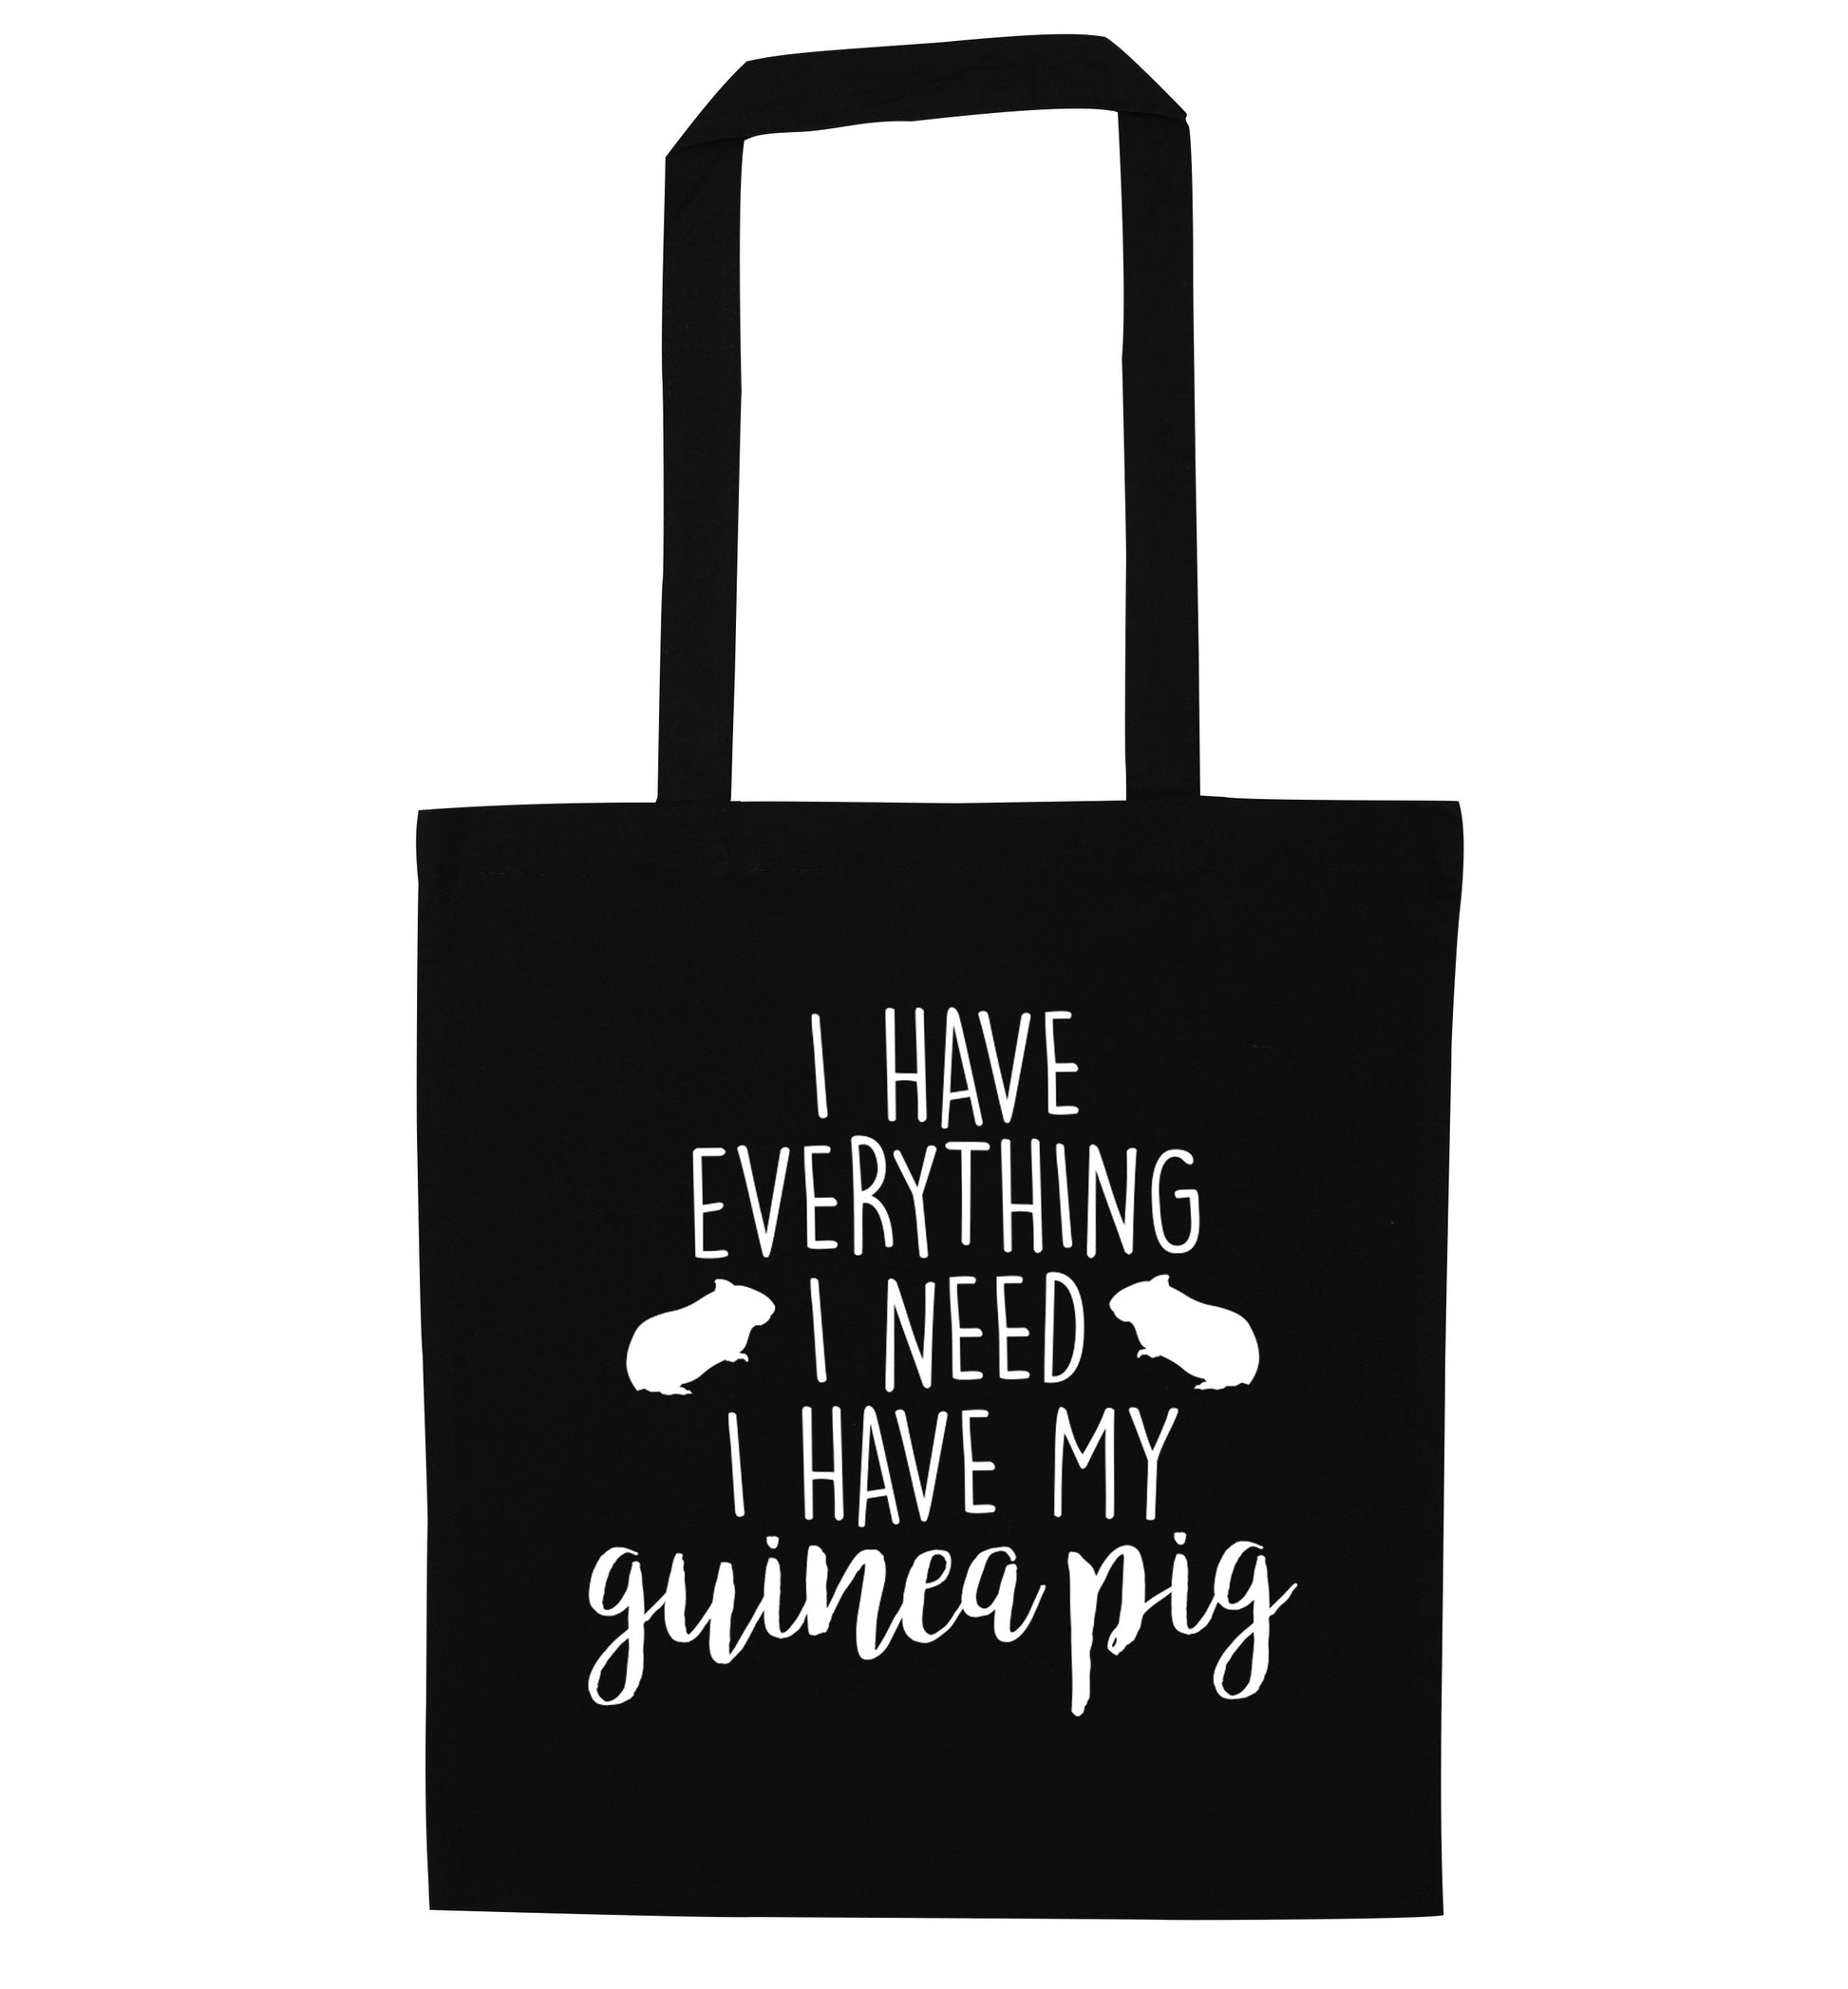 I have everything I need, I have my guinea pig black tote bag